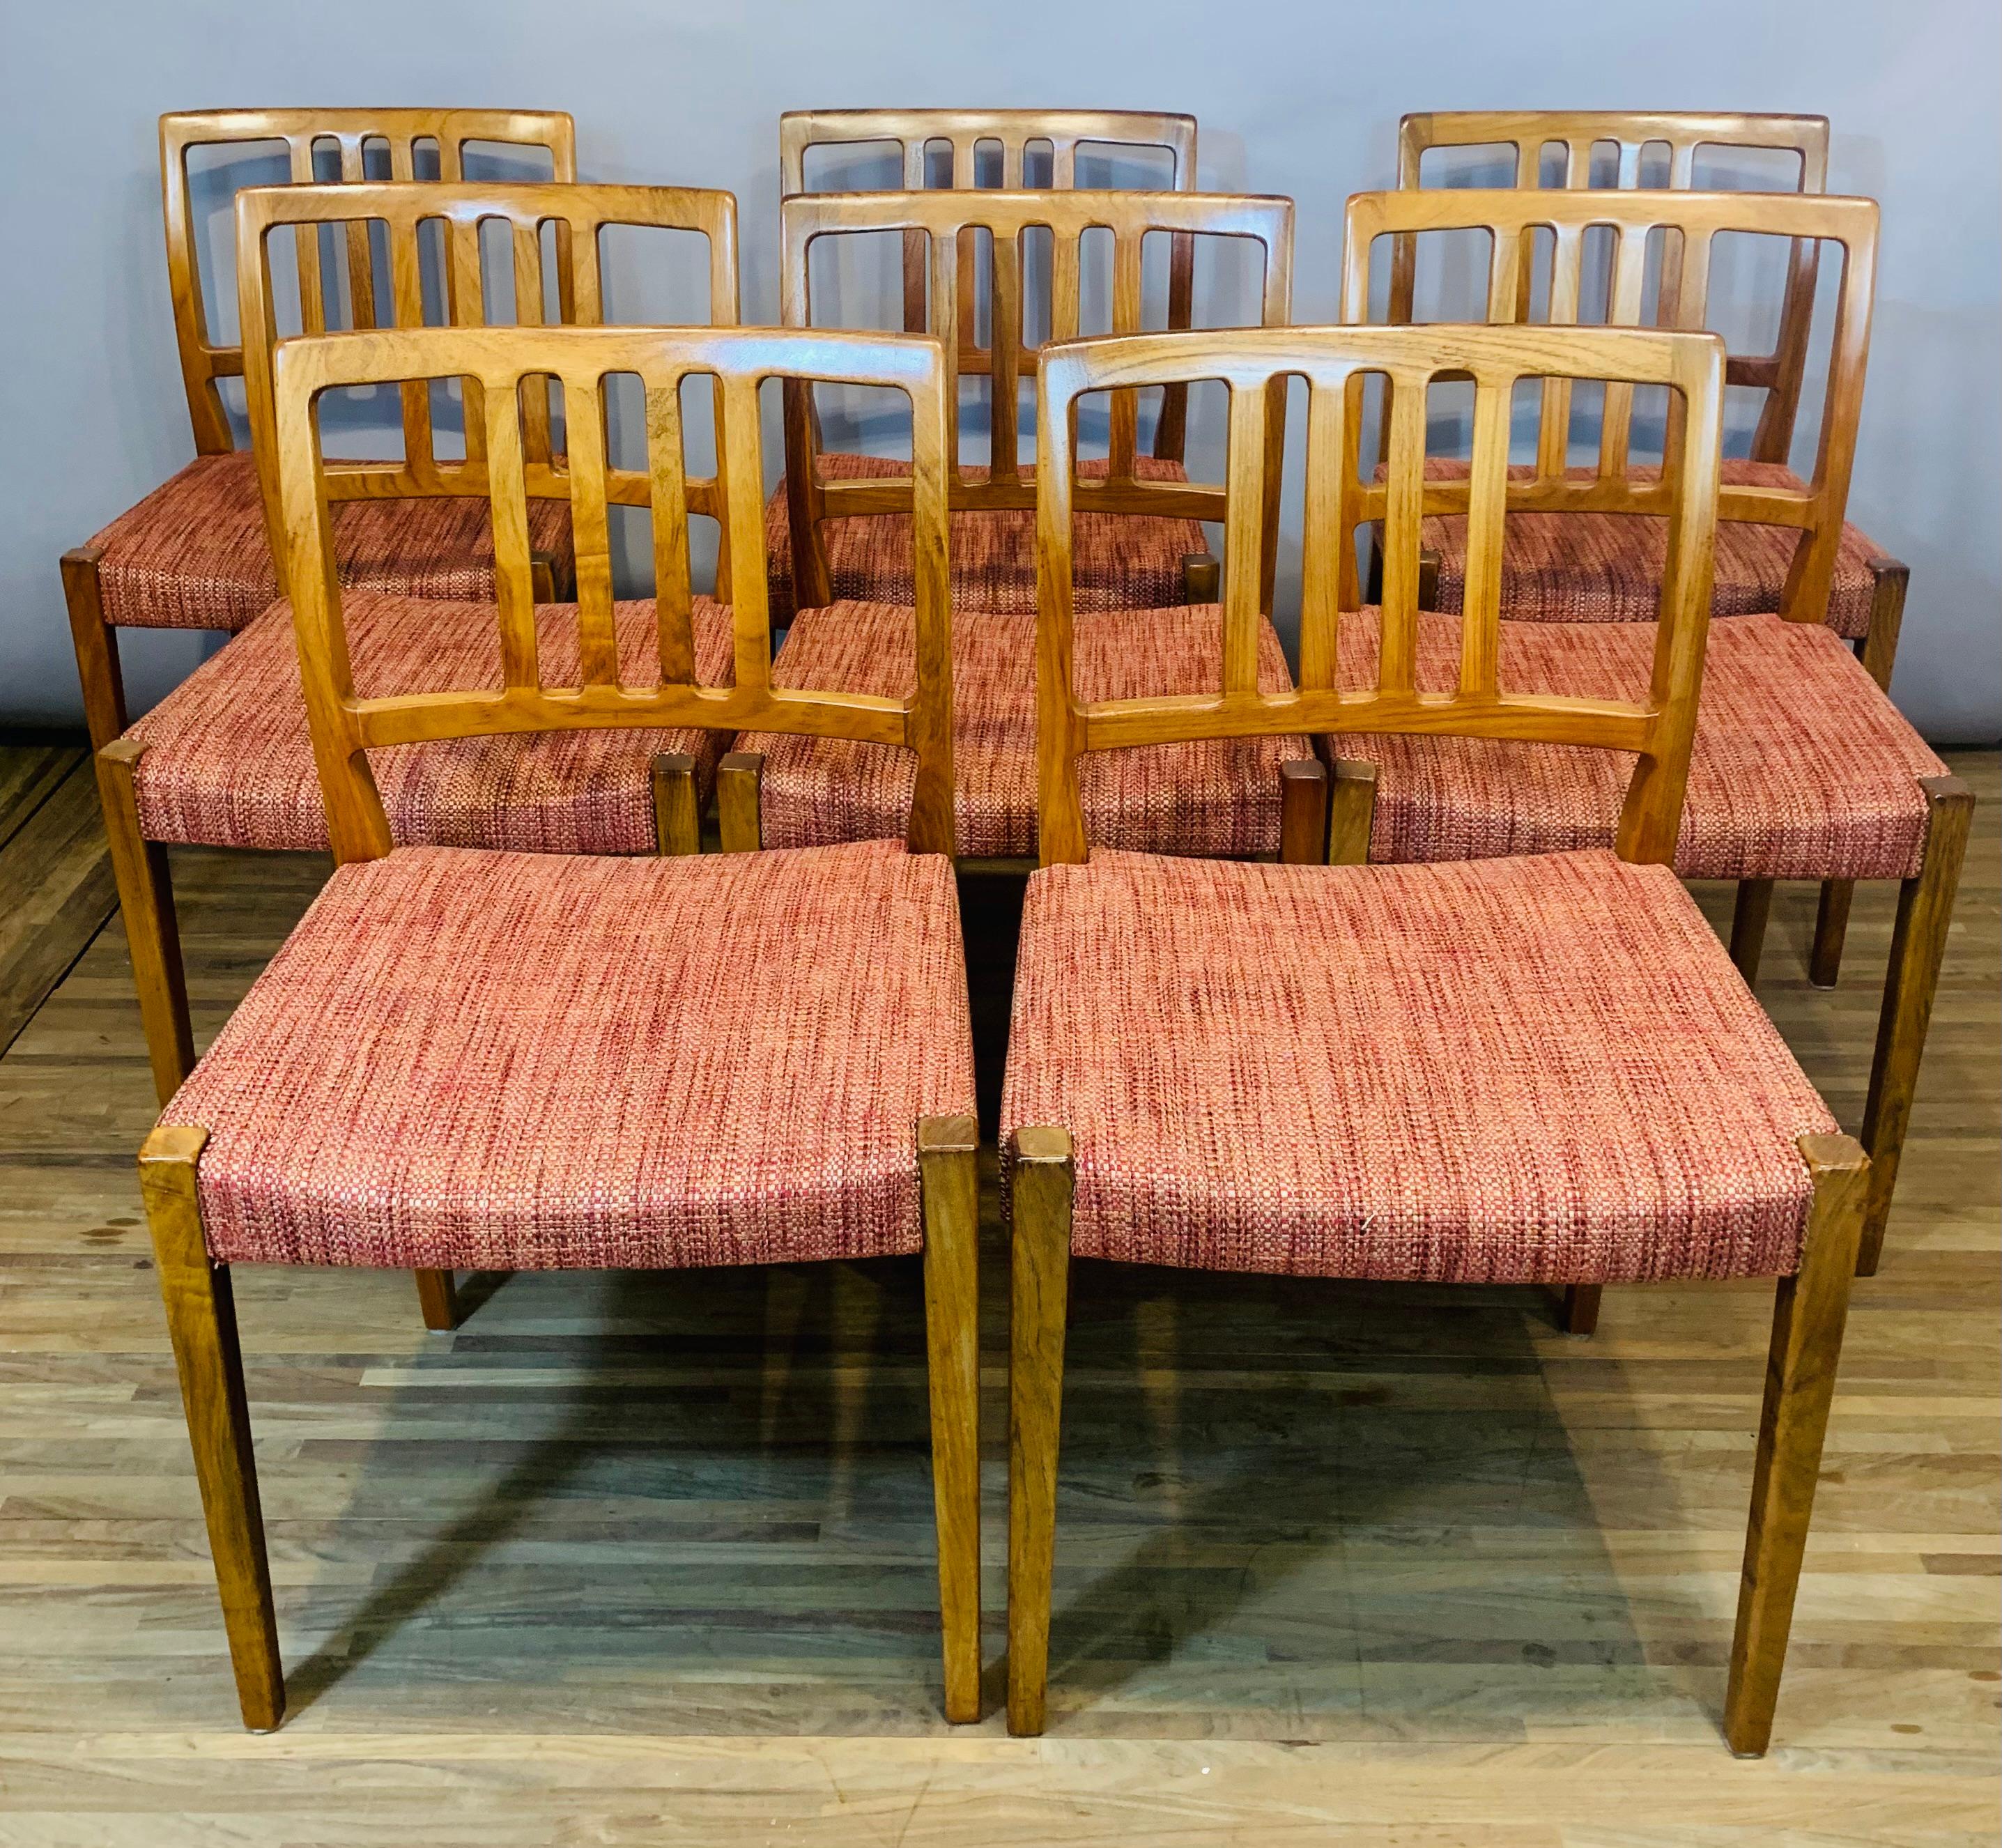 A very desirable and well-made set of 8 Rosewood mid-century dining chairs. Manufactured in Denmark during the 1960s by Dyrlund. These rare to source dining chairs have been restored and feature an eye-catching colourful fabric on each of their